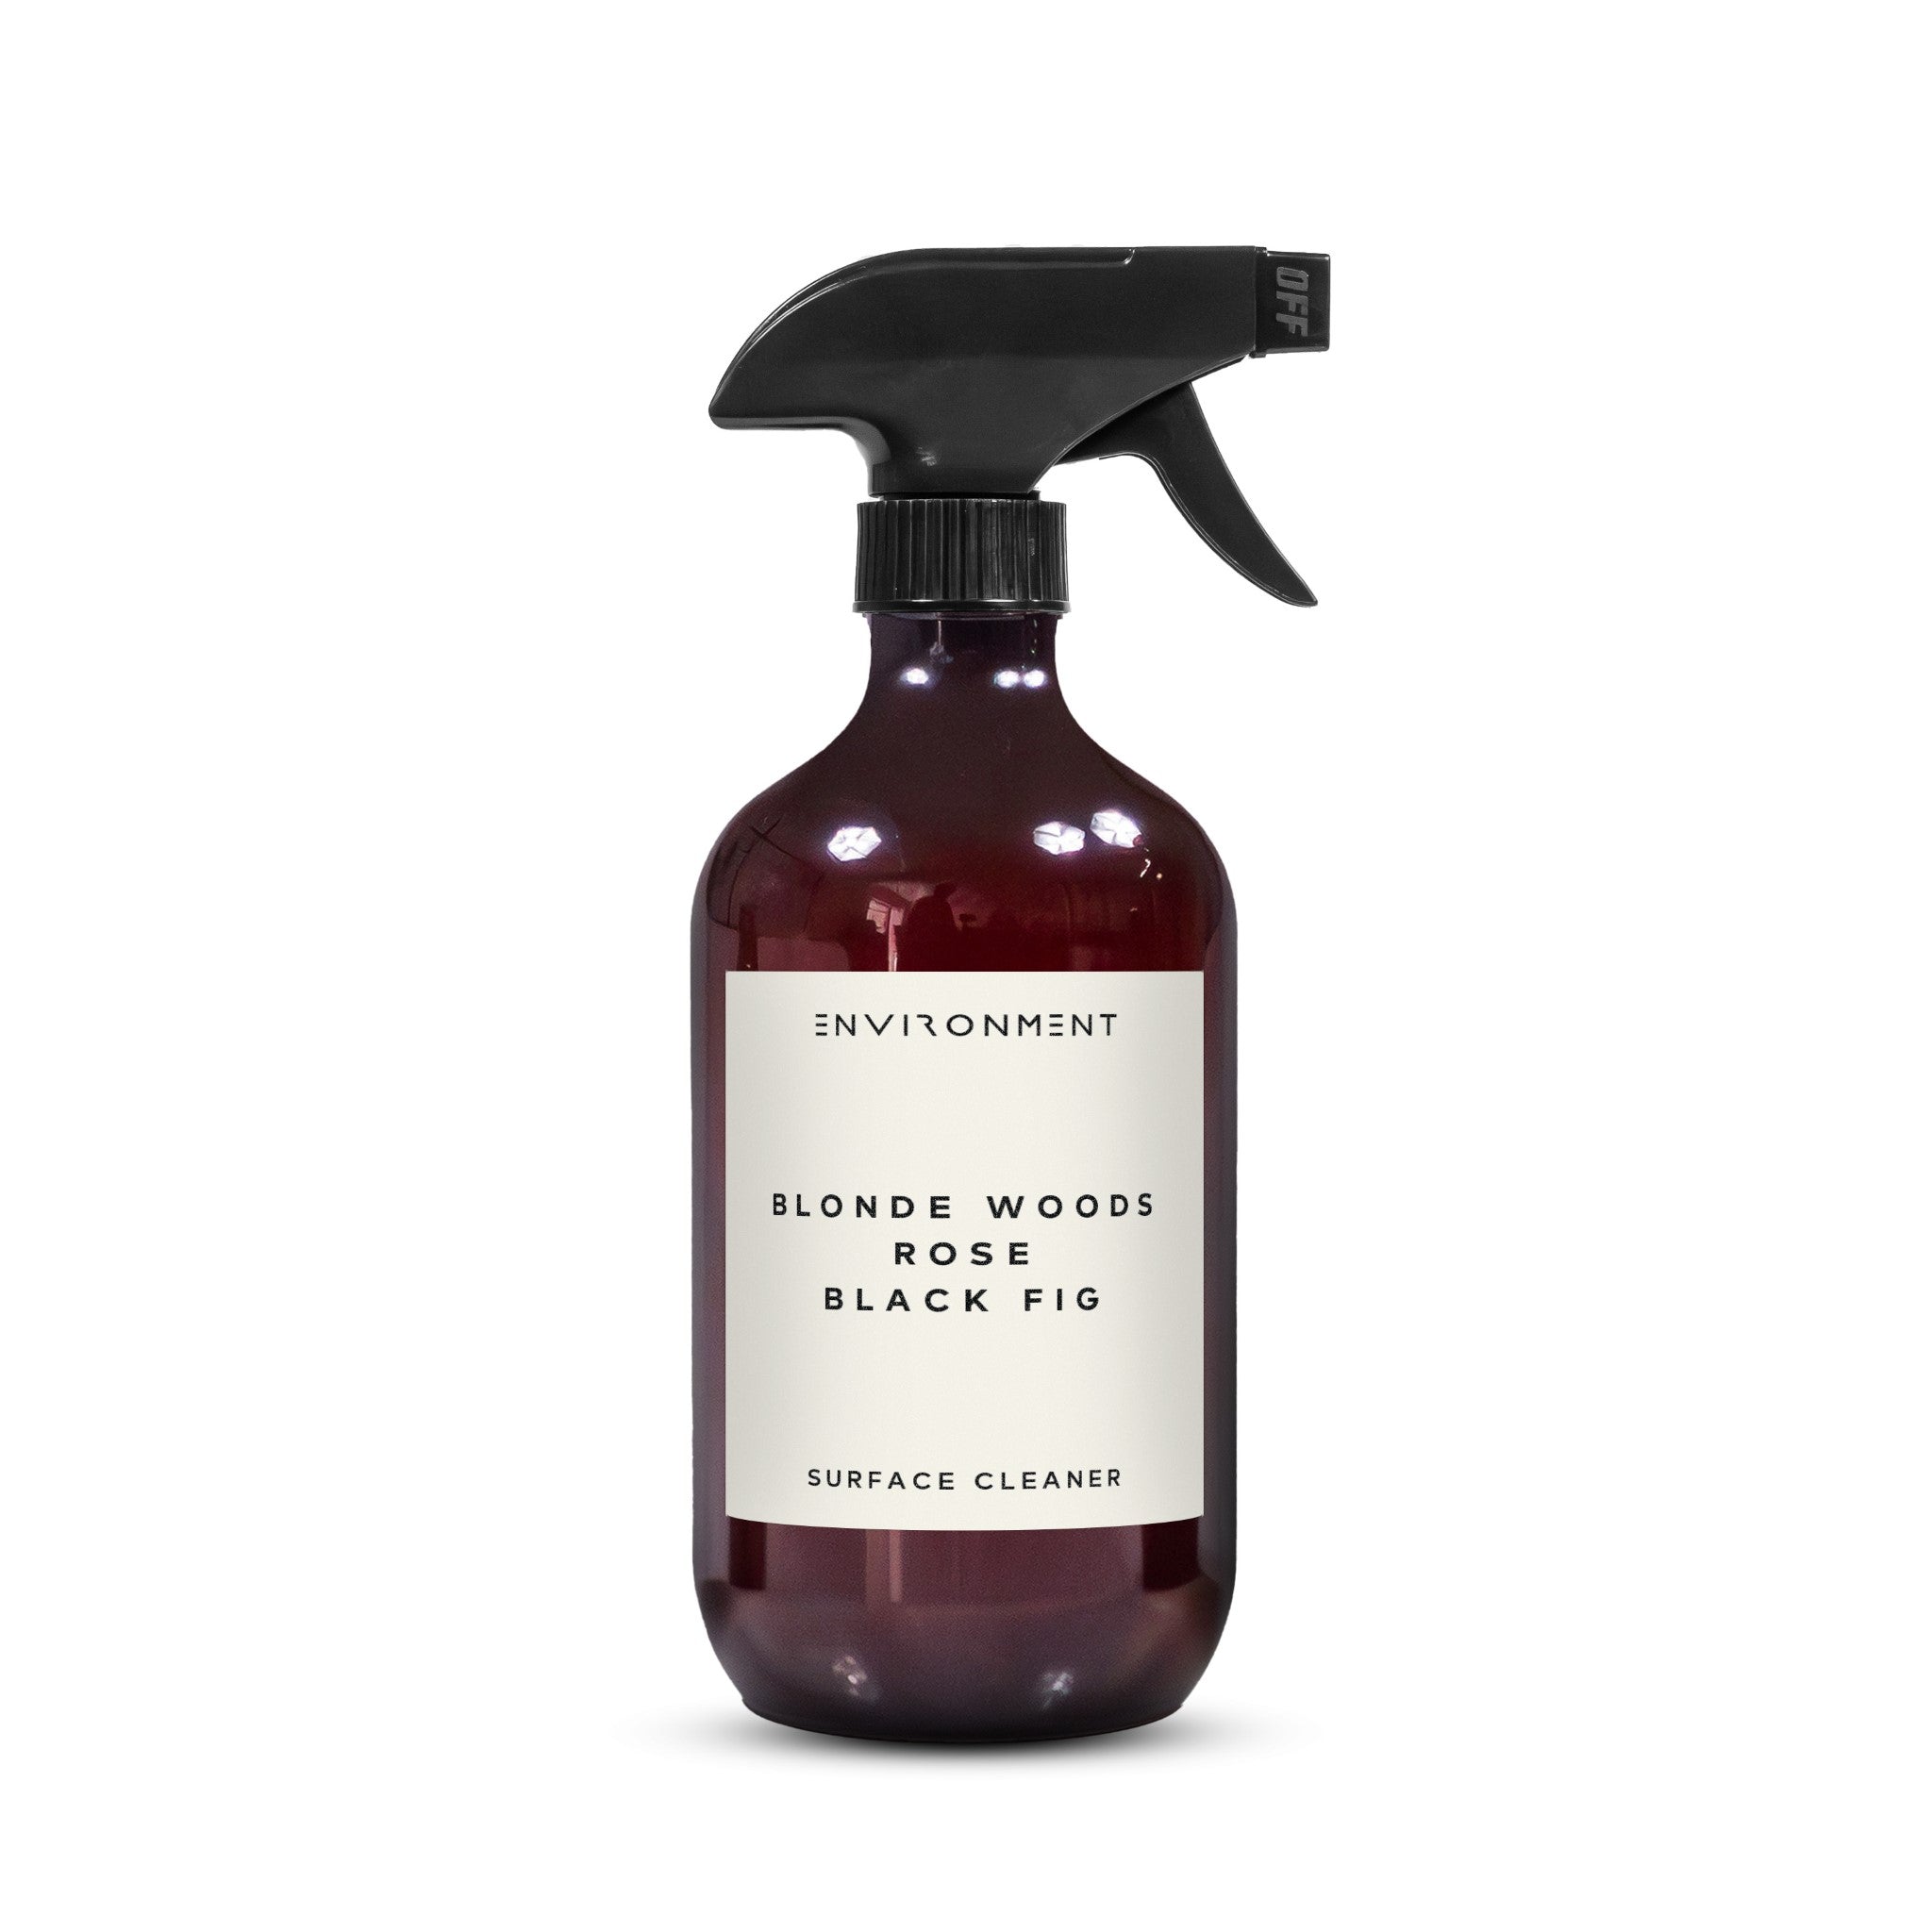 Blonde Woods | Rose | Black Fig All-Purpose Cleaner (Inspired by The EDITION Hotel®)